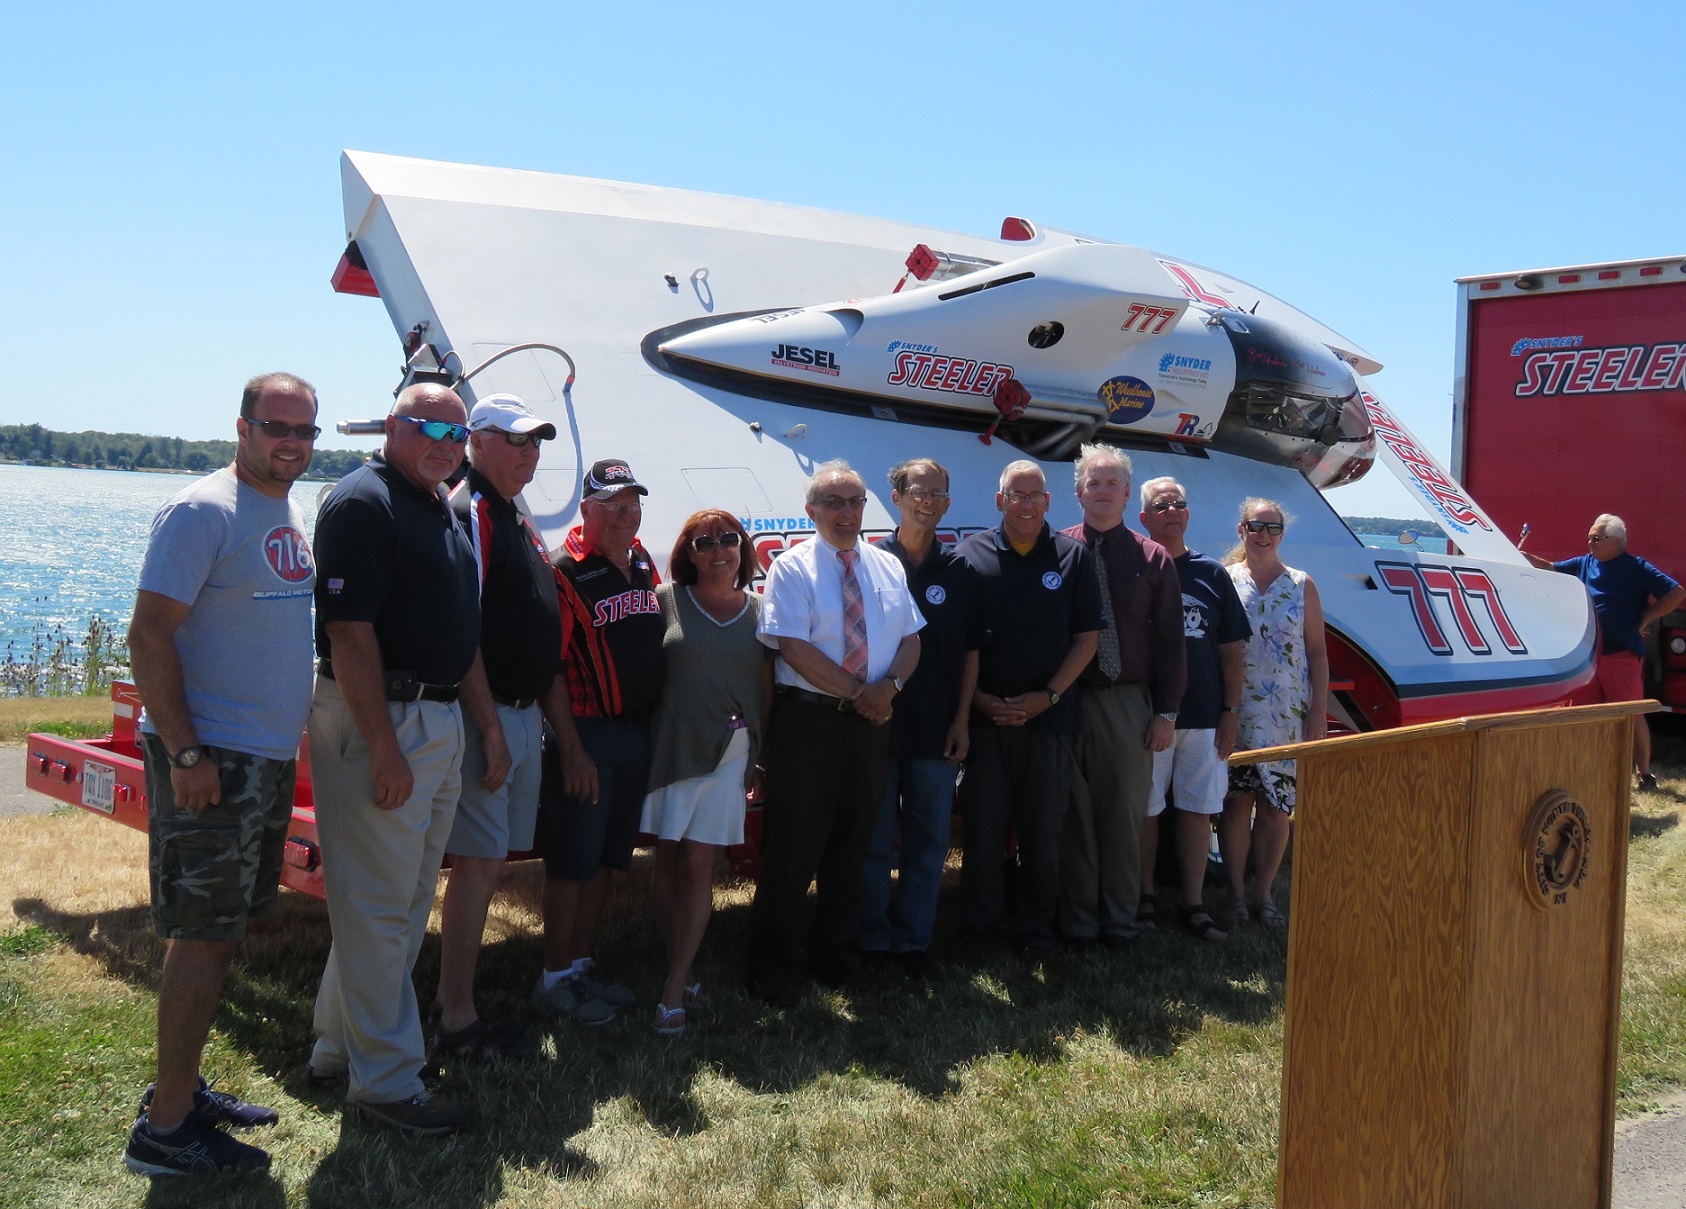 North Tonawanda city officials and Thunder on the Niagara sponsors pose for a group picture following Monday's press conference. In the background is an example of a hydroplane that will take the Niagara River for the event. (Photo by David Yarger)